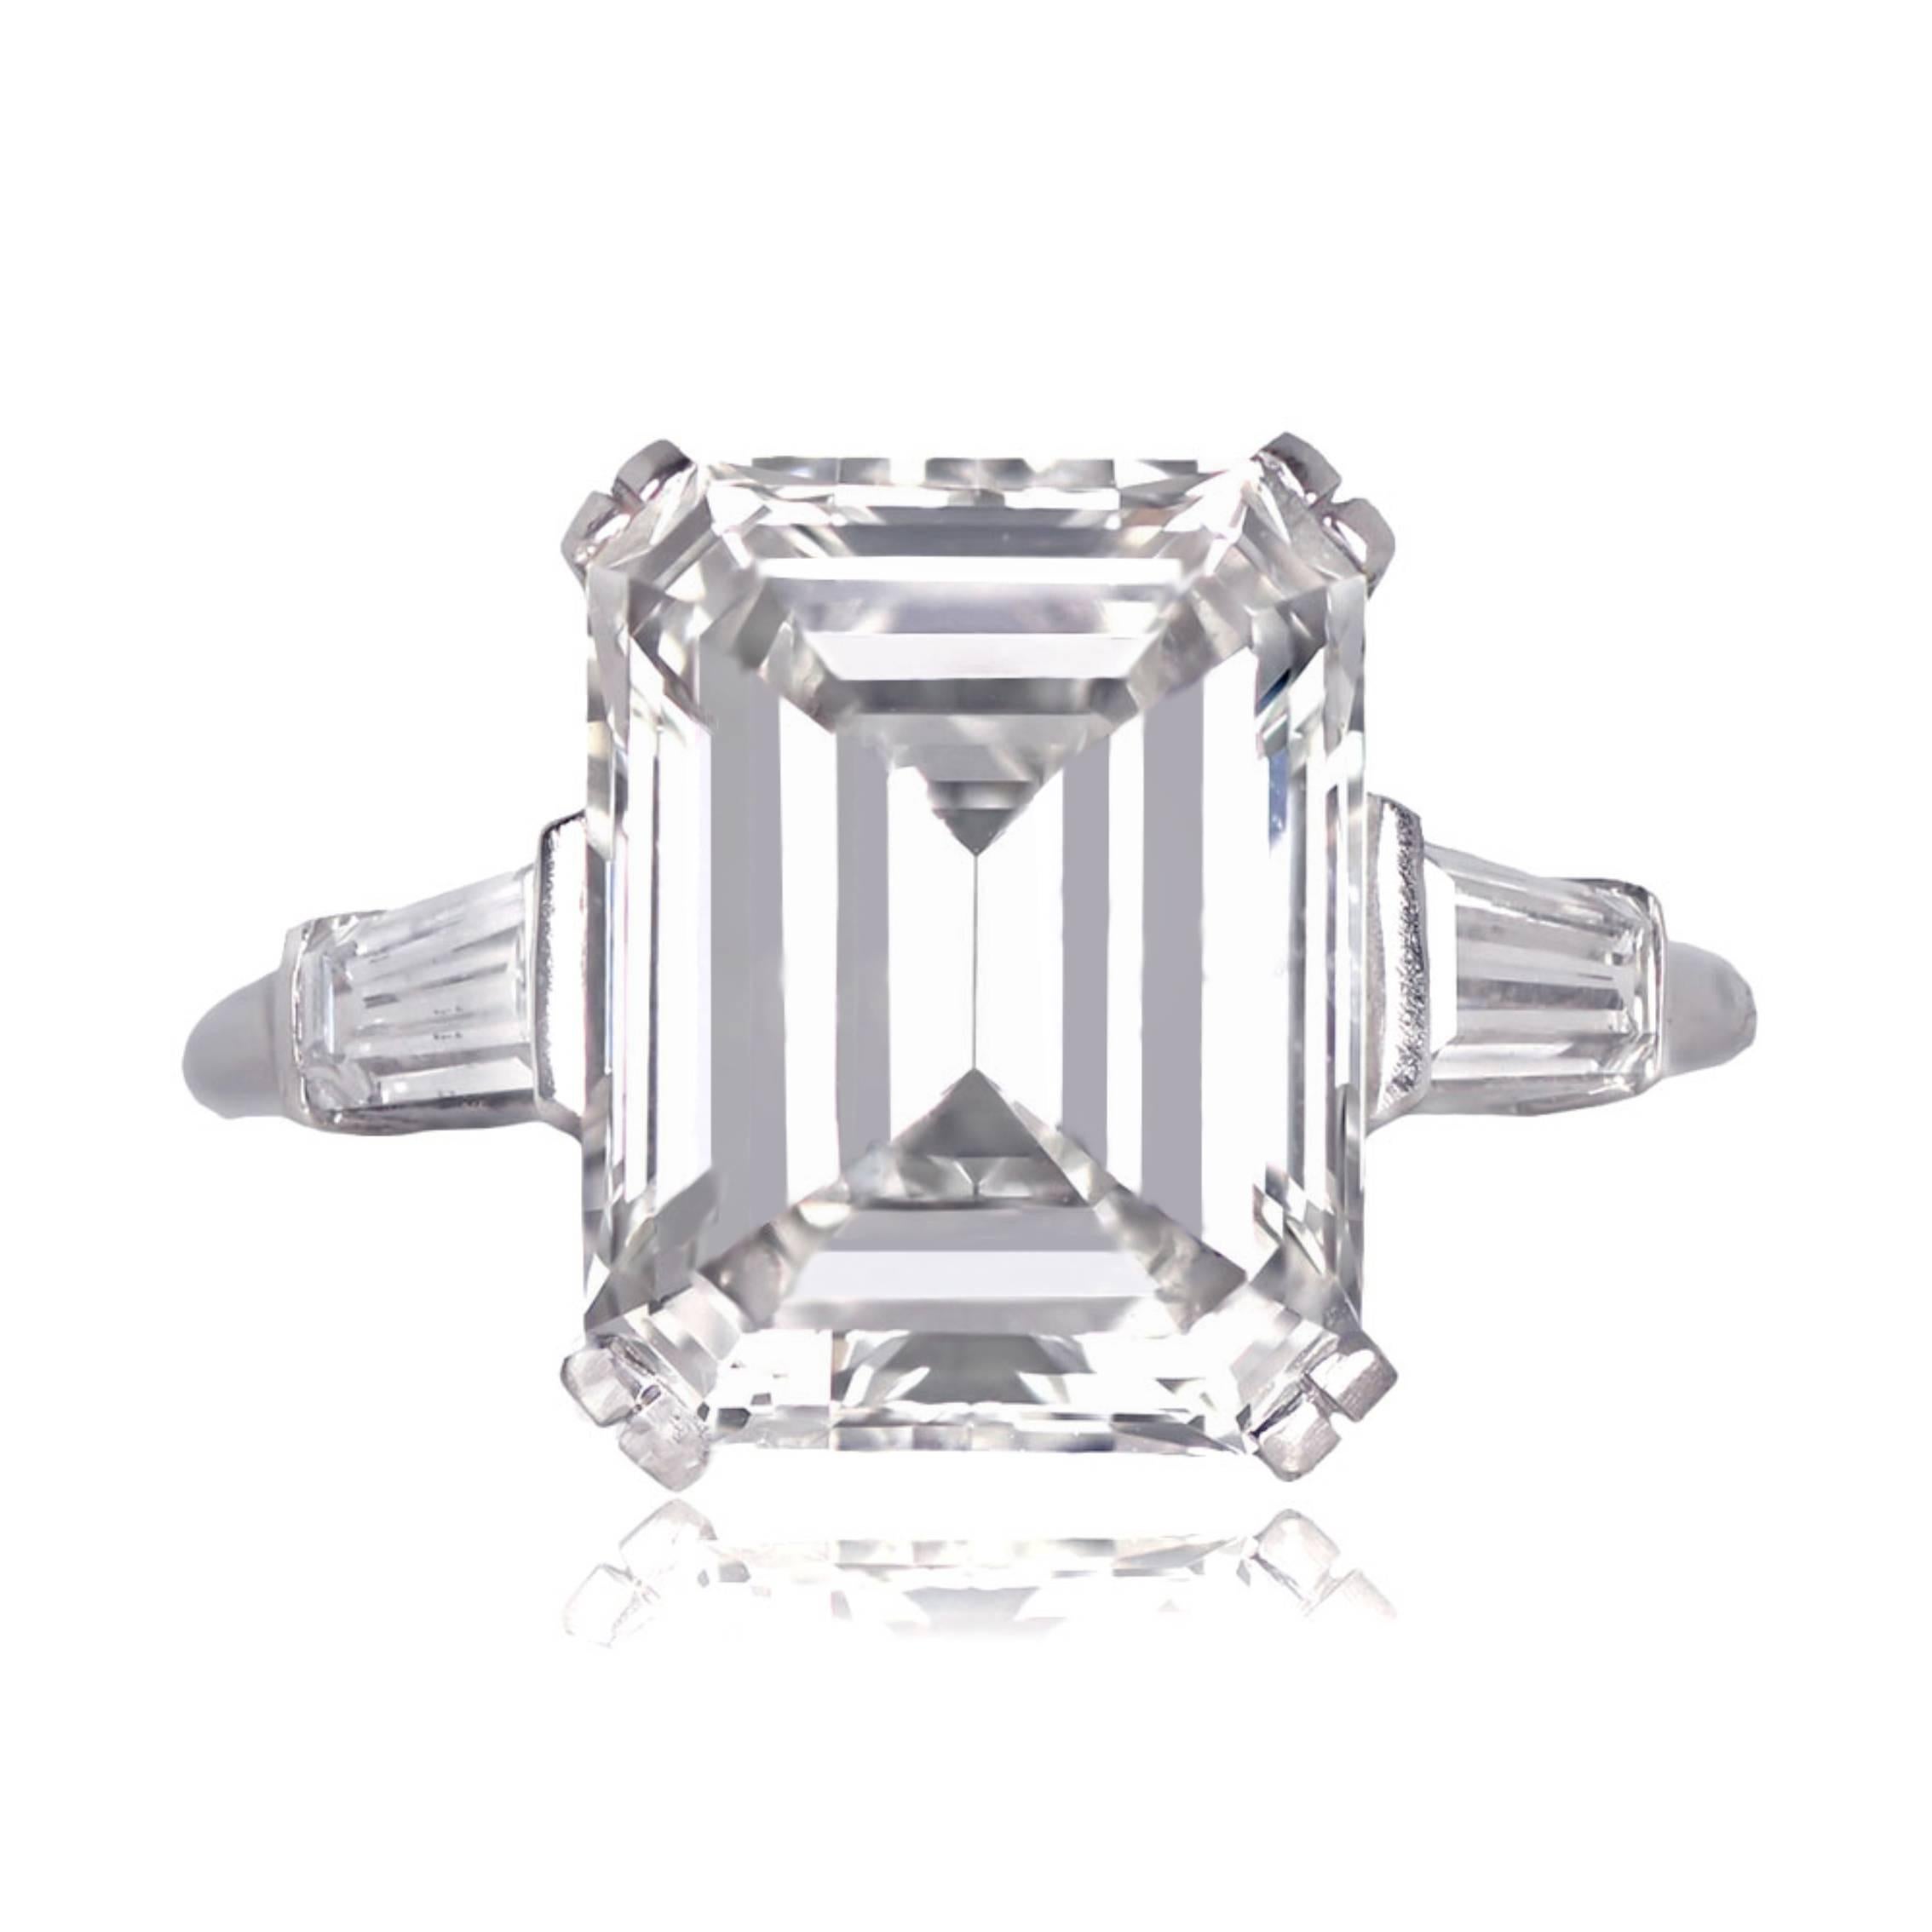 A vintage platinum engagement ring featuring a 6.49-carat emerald-cut diamond with J color and SI2 clarity. It is adorned with two tapered baguette-cut diamonds on the shoulders and dates back to approximately 1950.


Ring Size: 6.5 US,